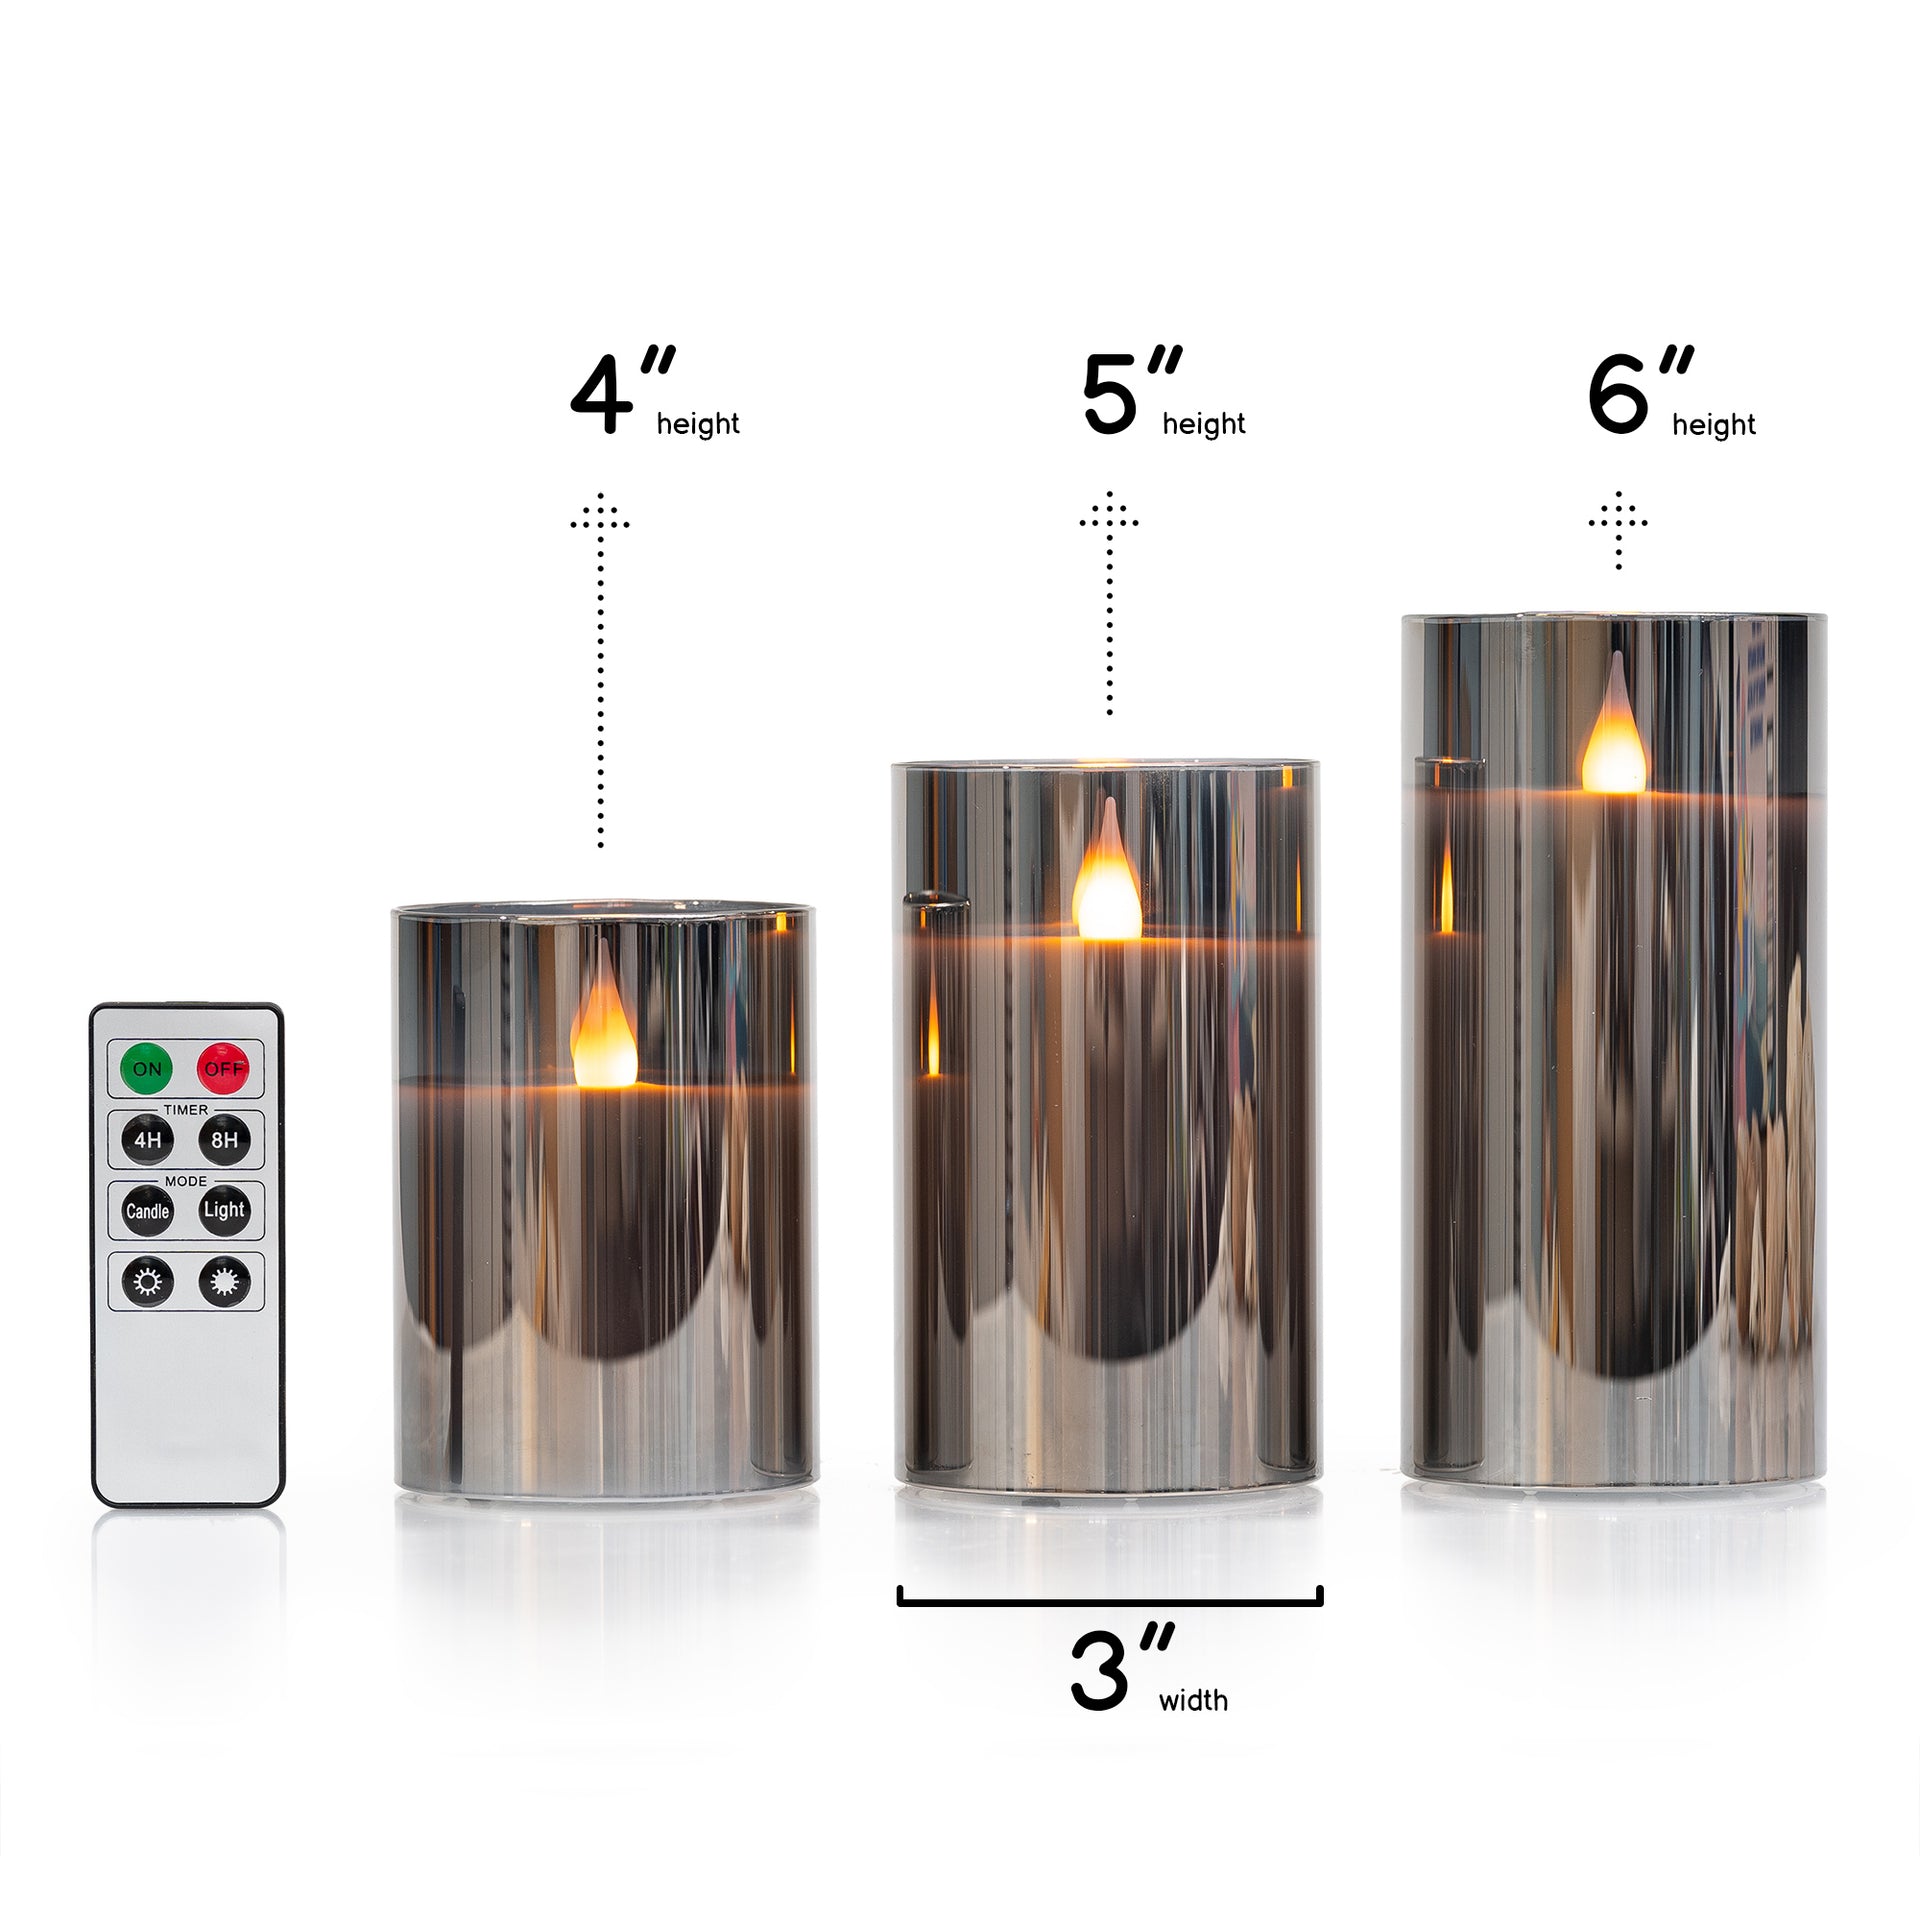 LED METALLIC MIRRORED GLASS FLICKERING FLAMELESS CANDLES - SET OF 3 (4" 5" 6") WITH REMOTE CONTROL - West Ivory LED Lighting 